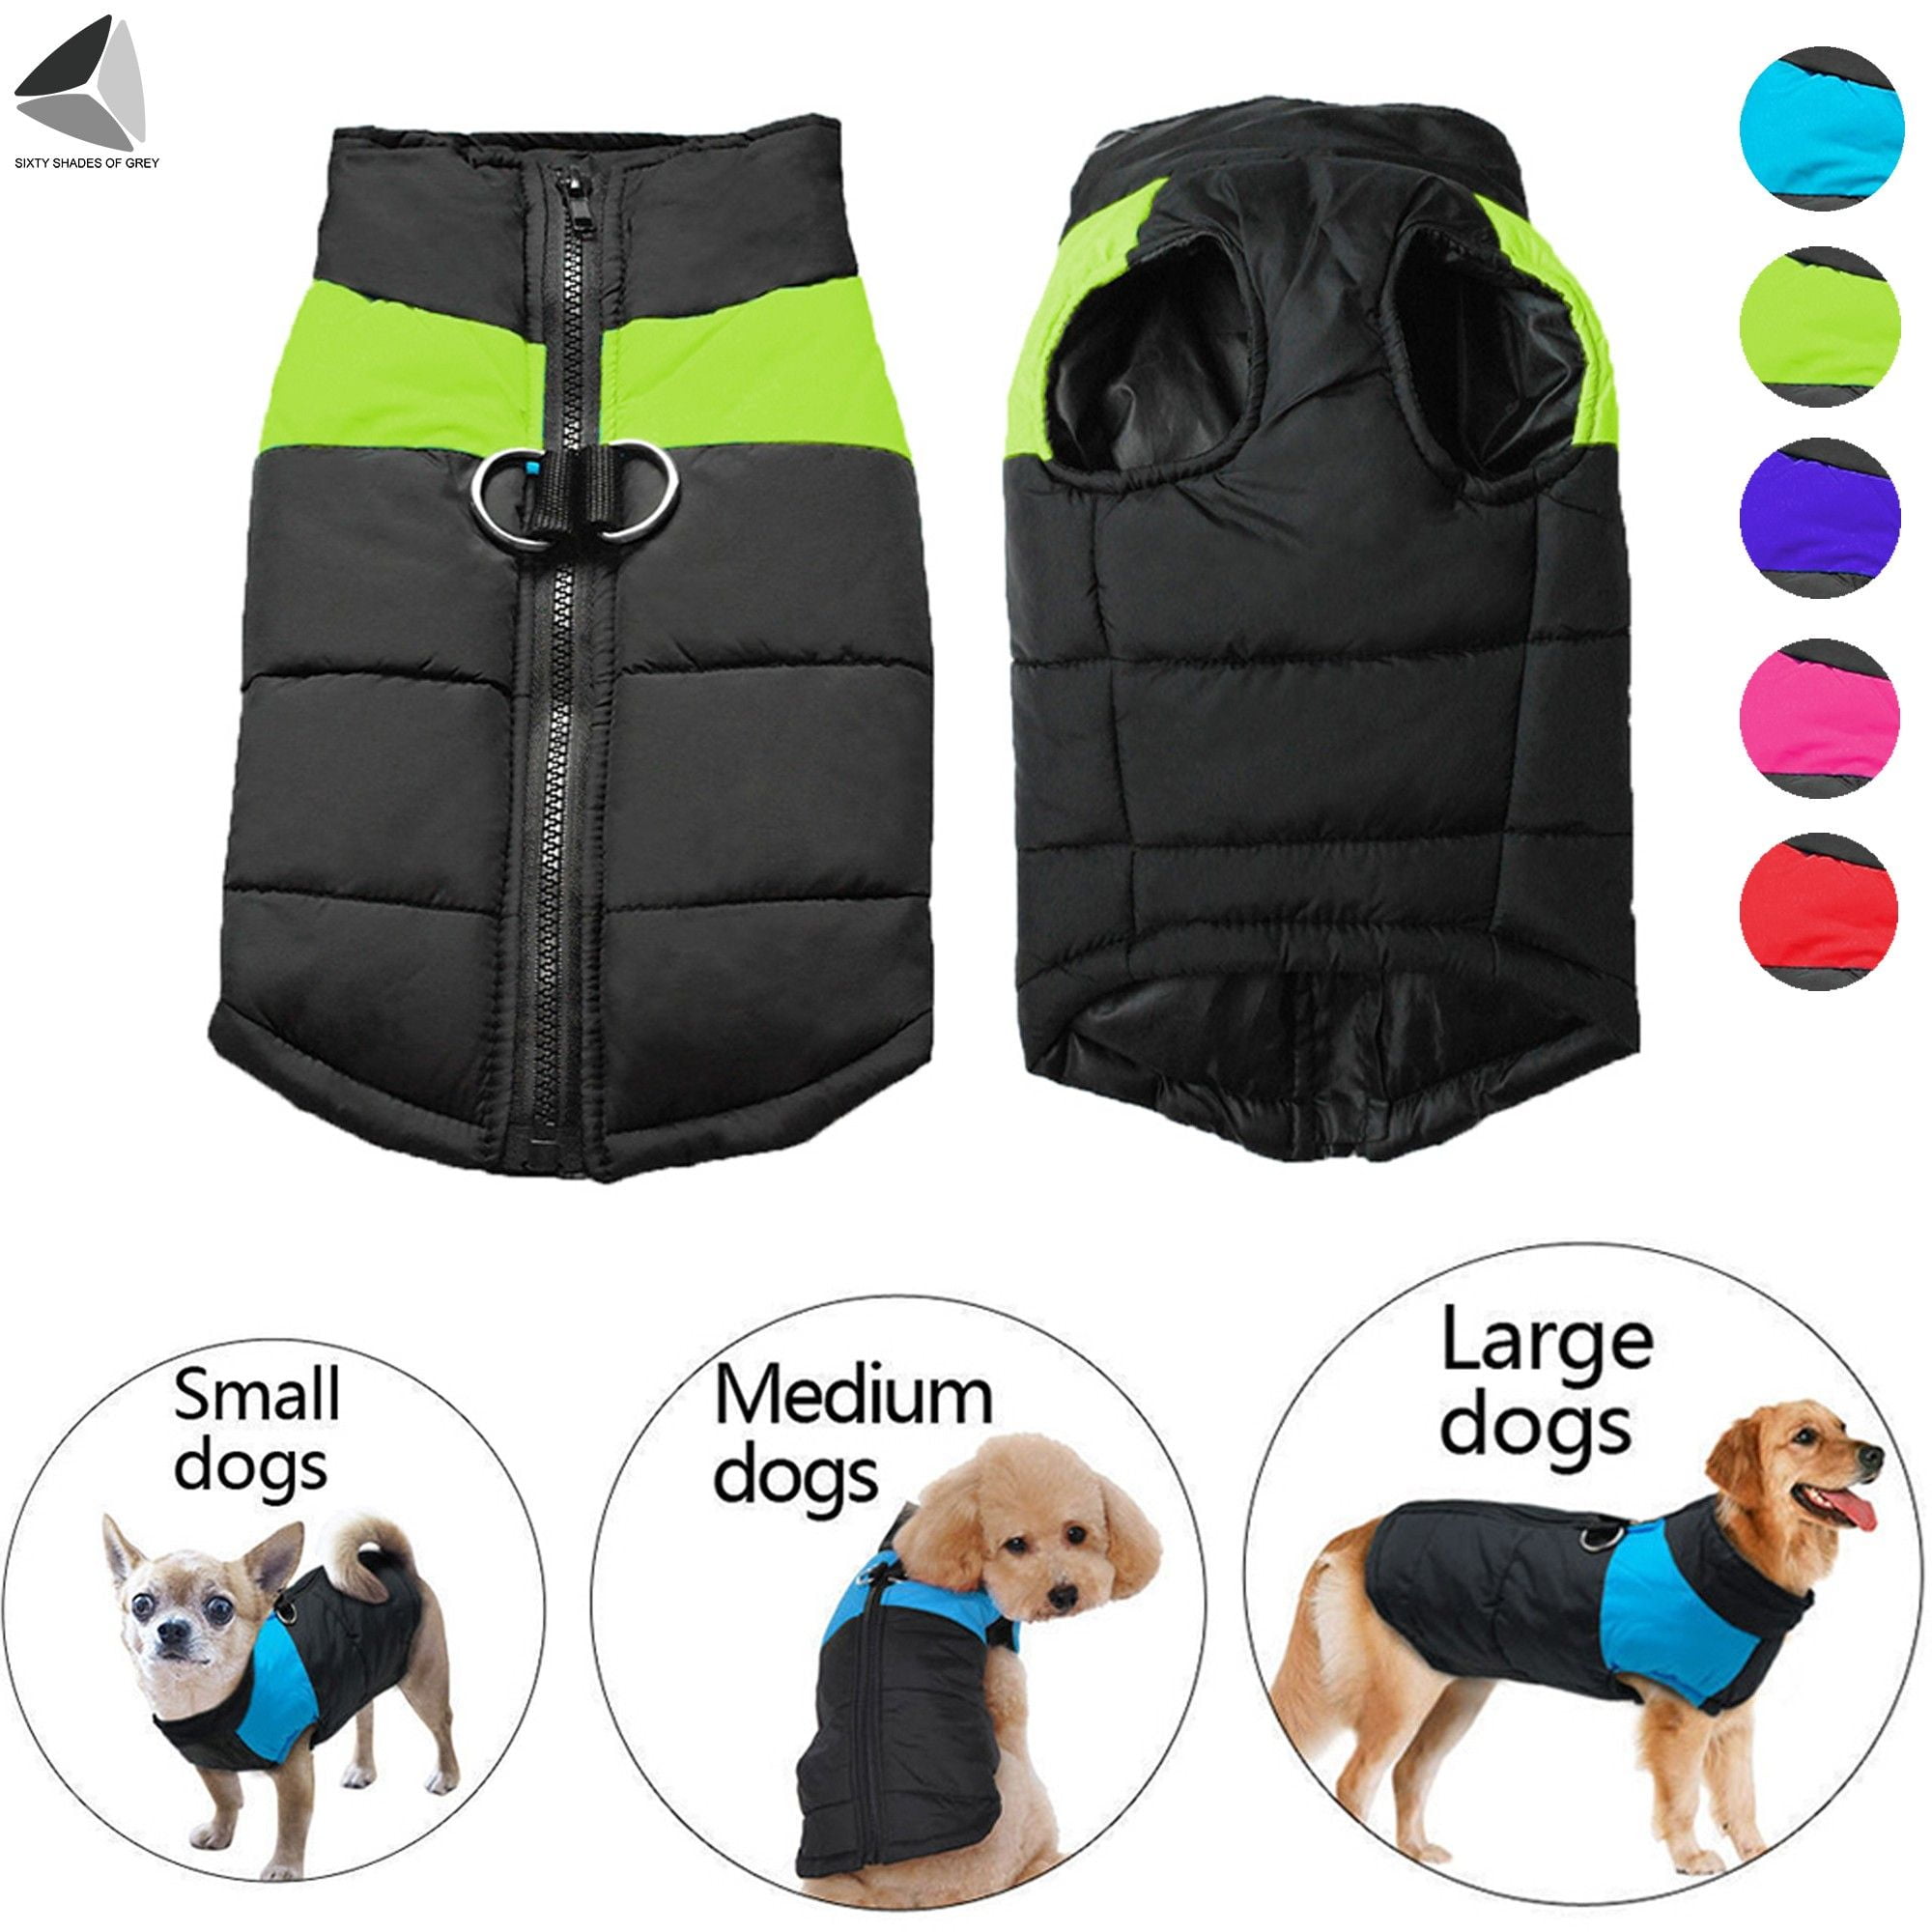 Winter Warm Big Dog Clothes Padded Waterproof Coats Pet Clothing for Large Dogs 